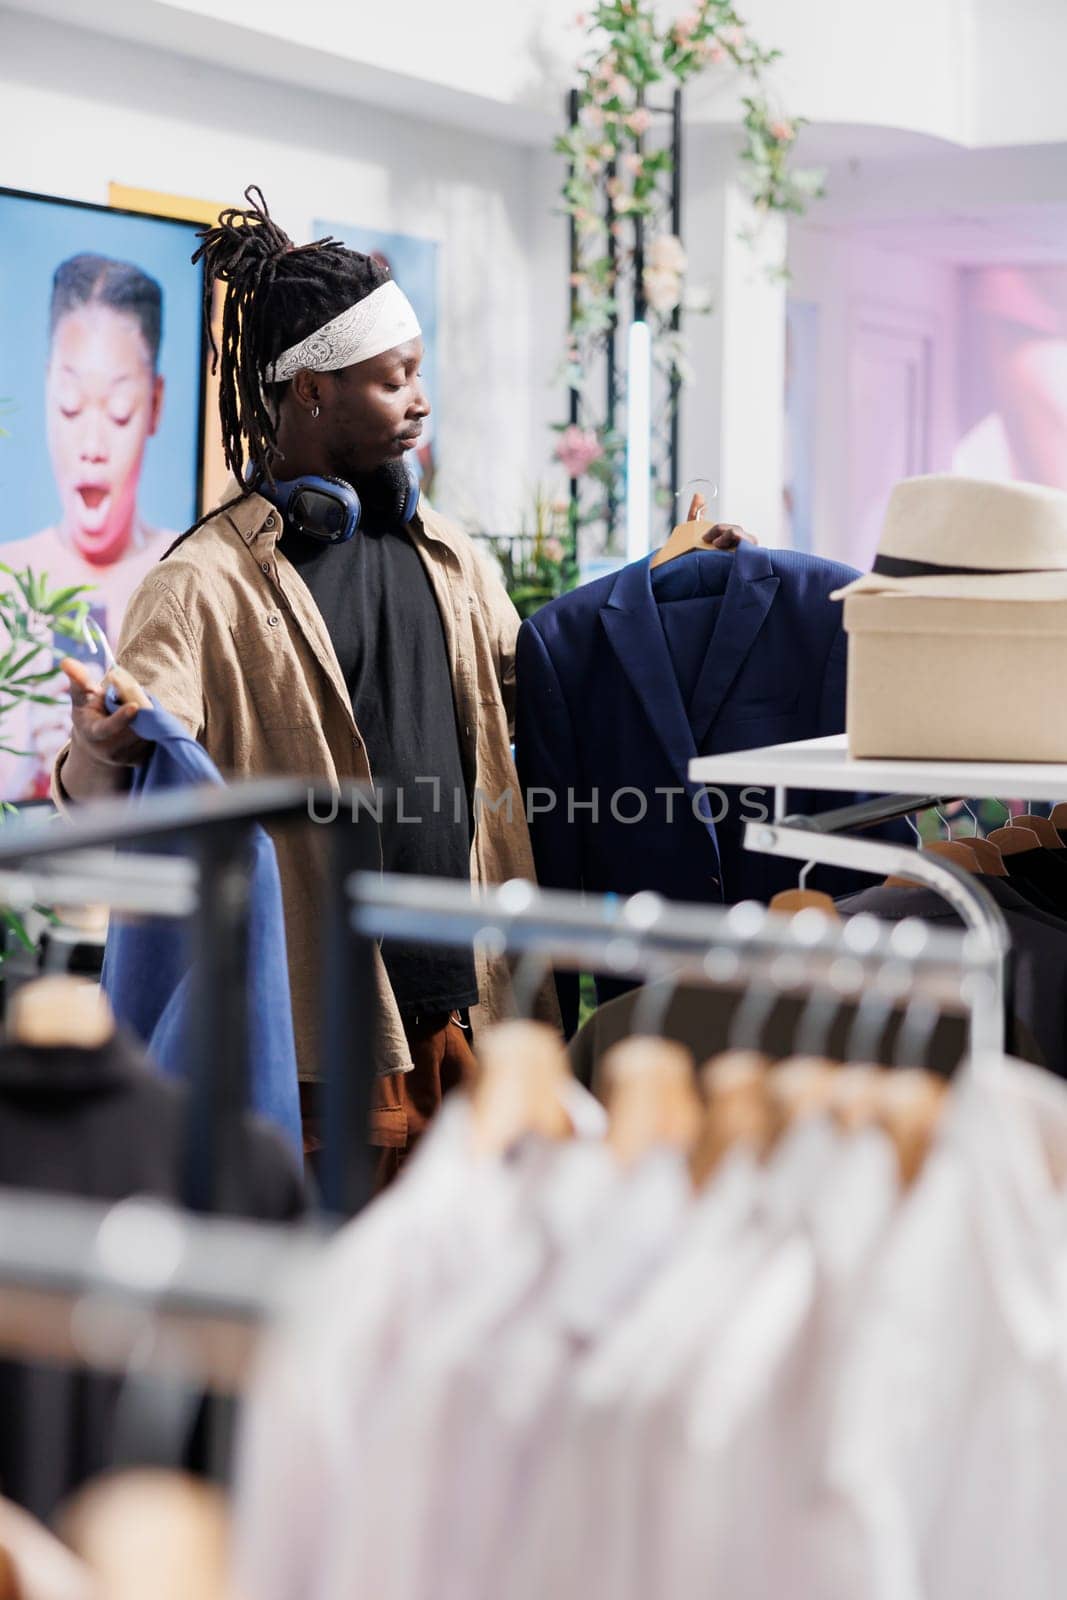 African american man holding two jackets on hangers, examining style and fit. Buyer choosing formal blazer while standing near racks full of clothes and shopping for apparel in mall